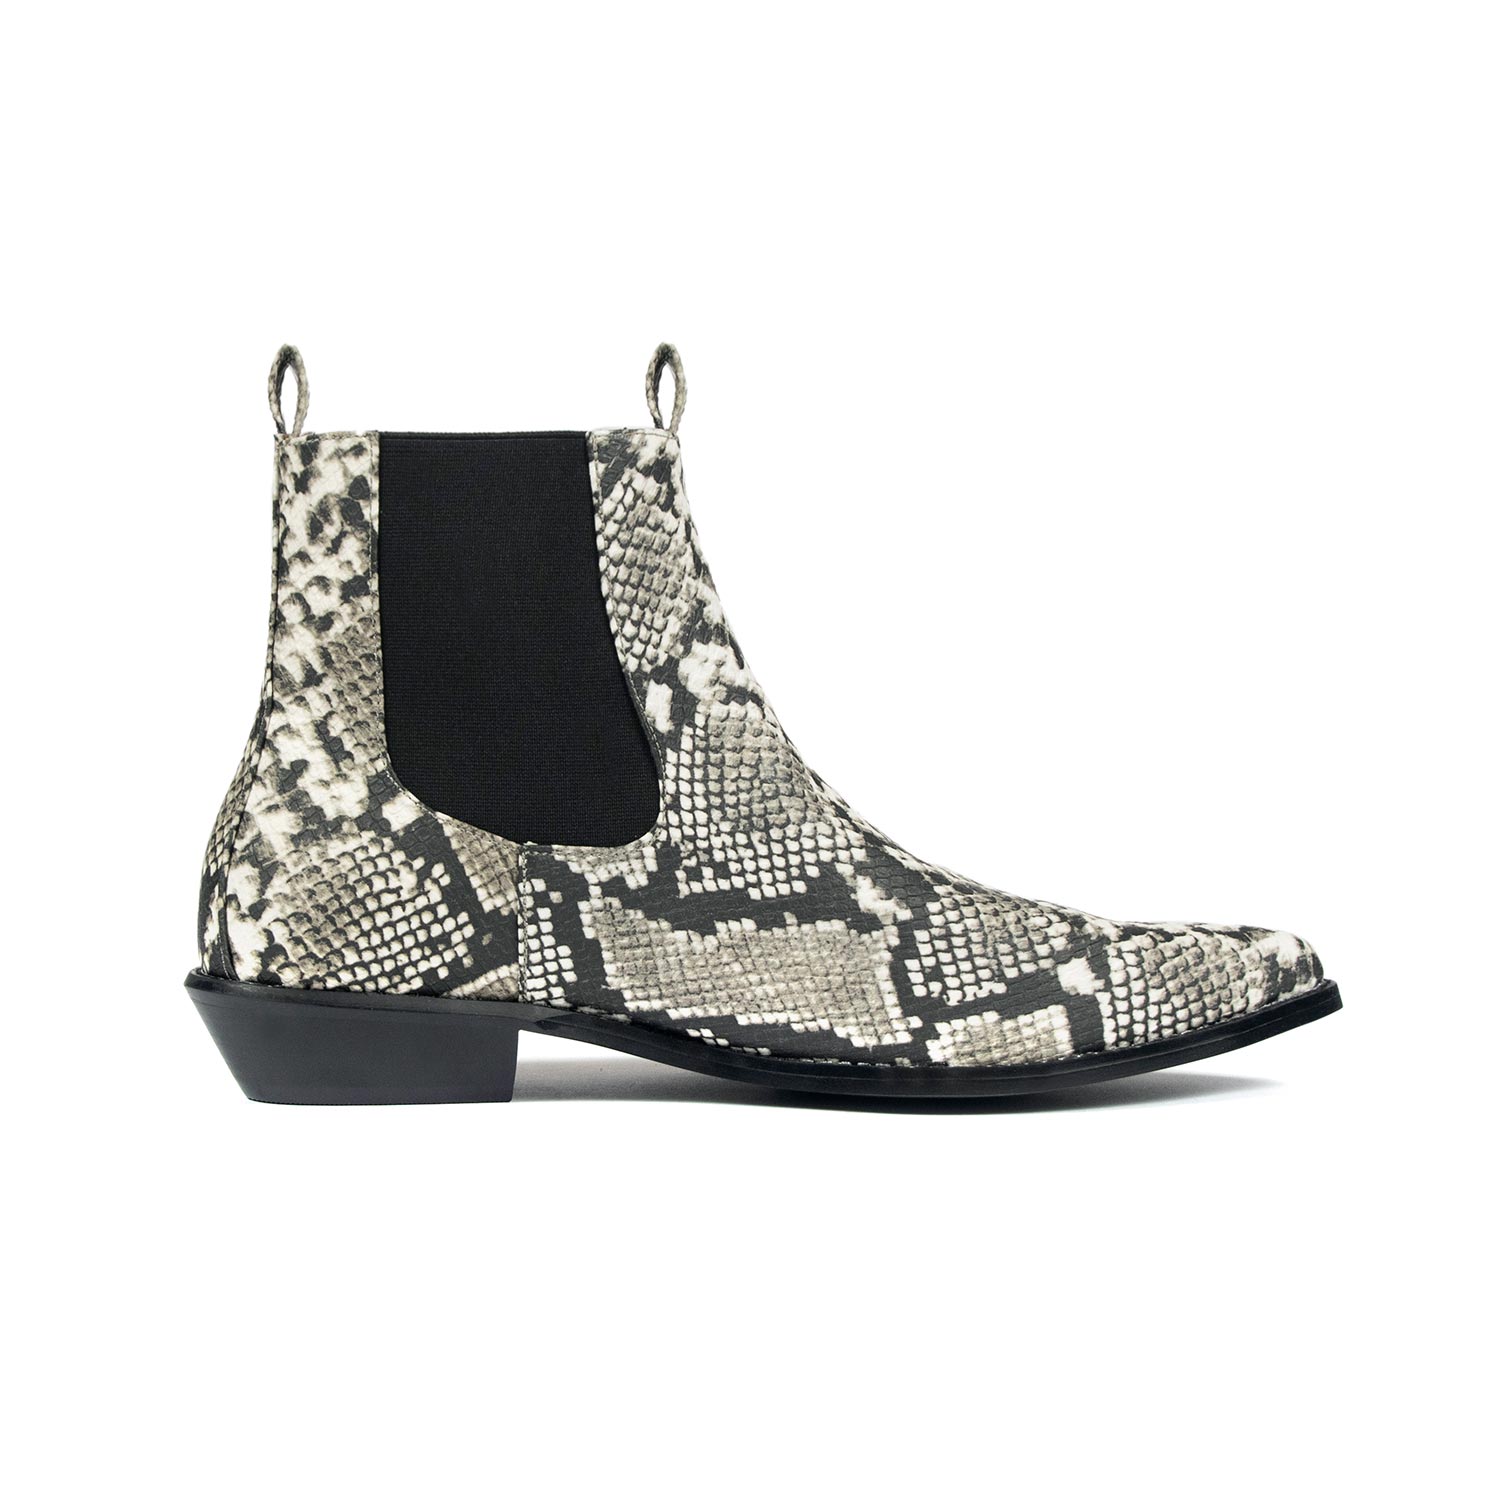 masser Officer specifikation Vegan Addison - Grey Snakeskin Faux Leather Chelsea Boots | Straight To  Hell Apparel